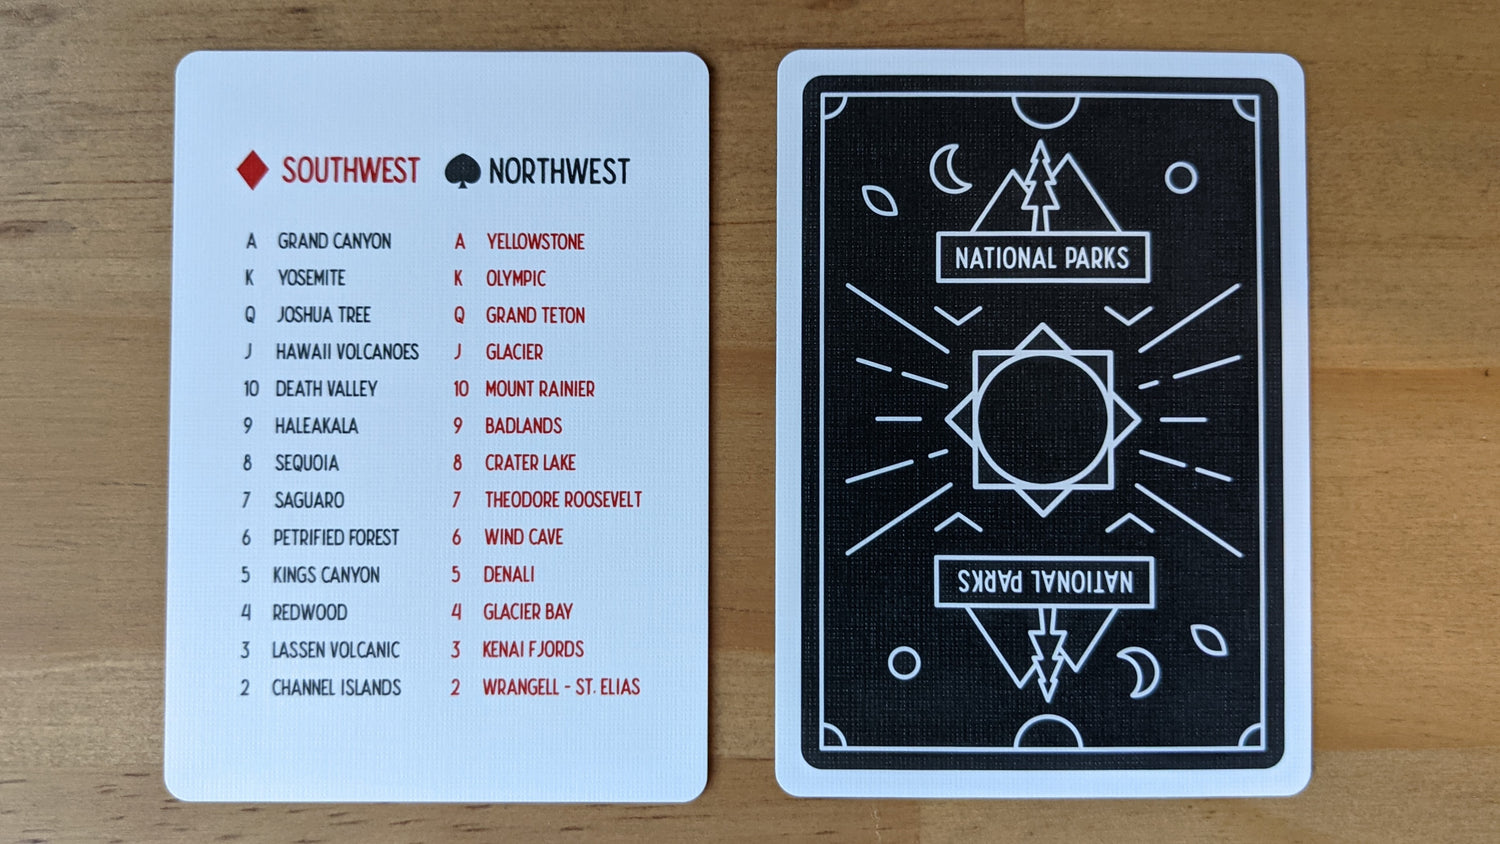 National Park Playing Cards example list of parks